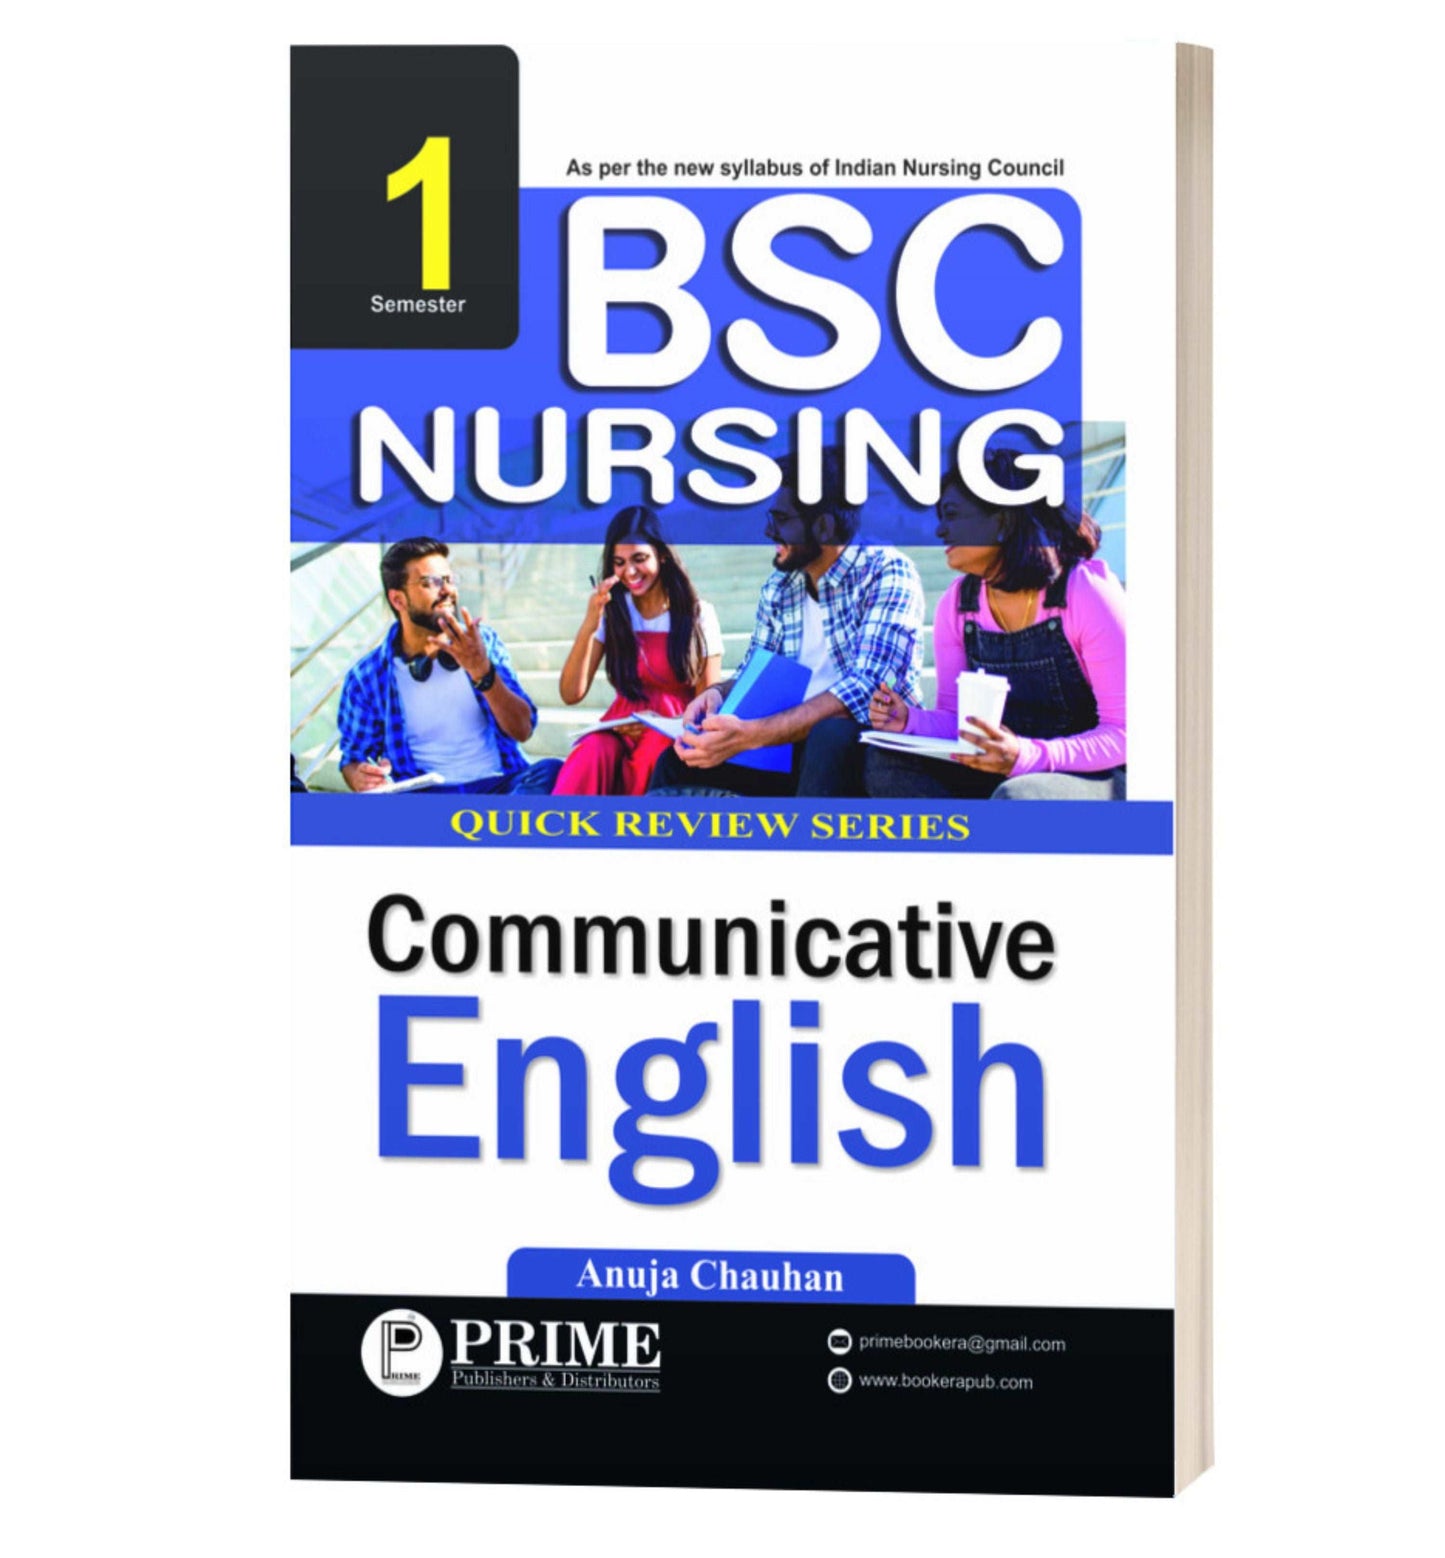 Quick Review Series of Communicative English